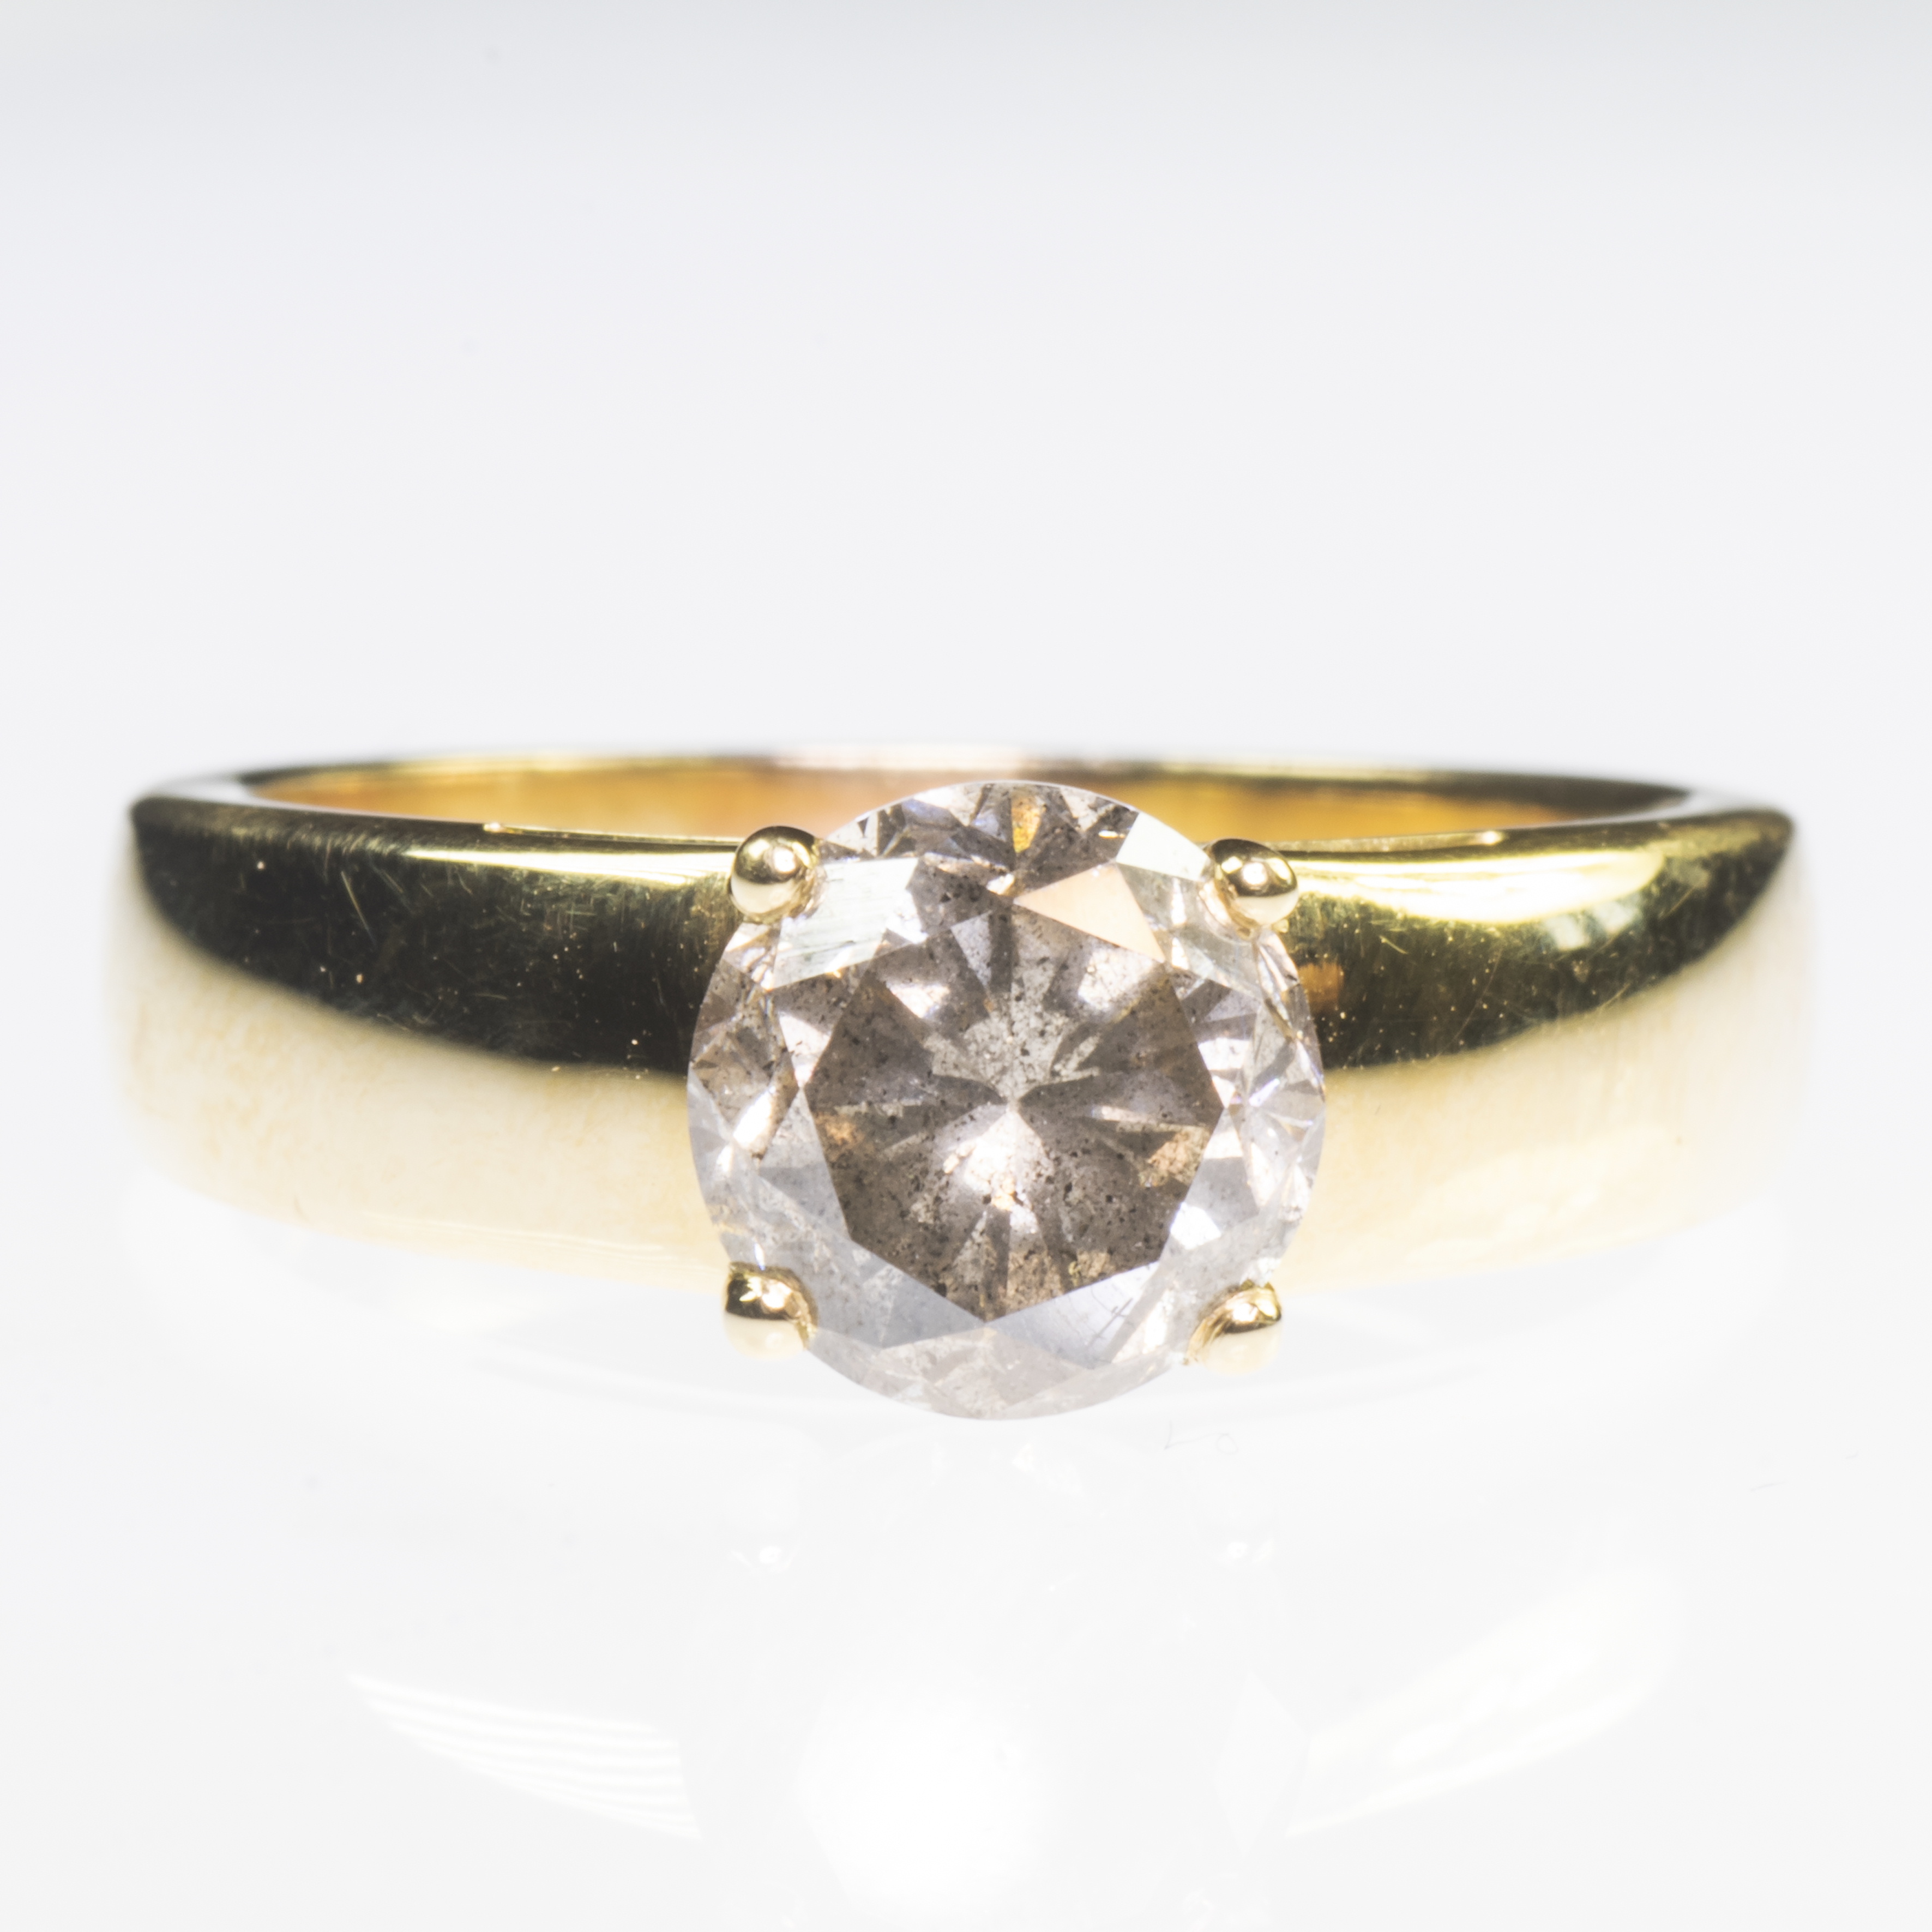 AN 18CT YELLOW GOLD AND BRILLIANT CUT DIAMOND RING